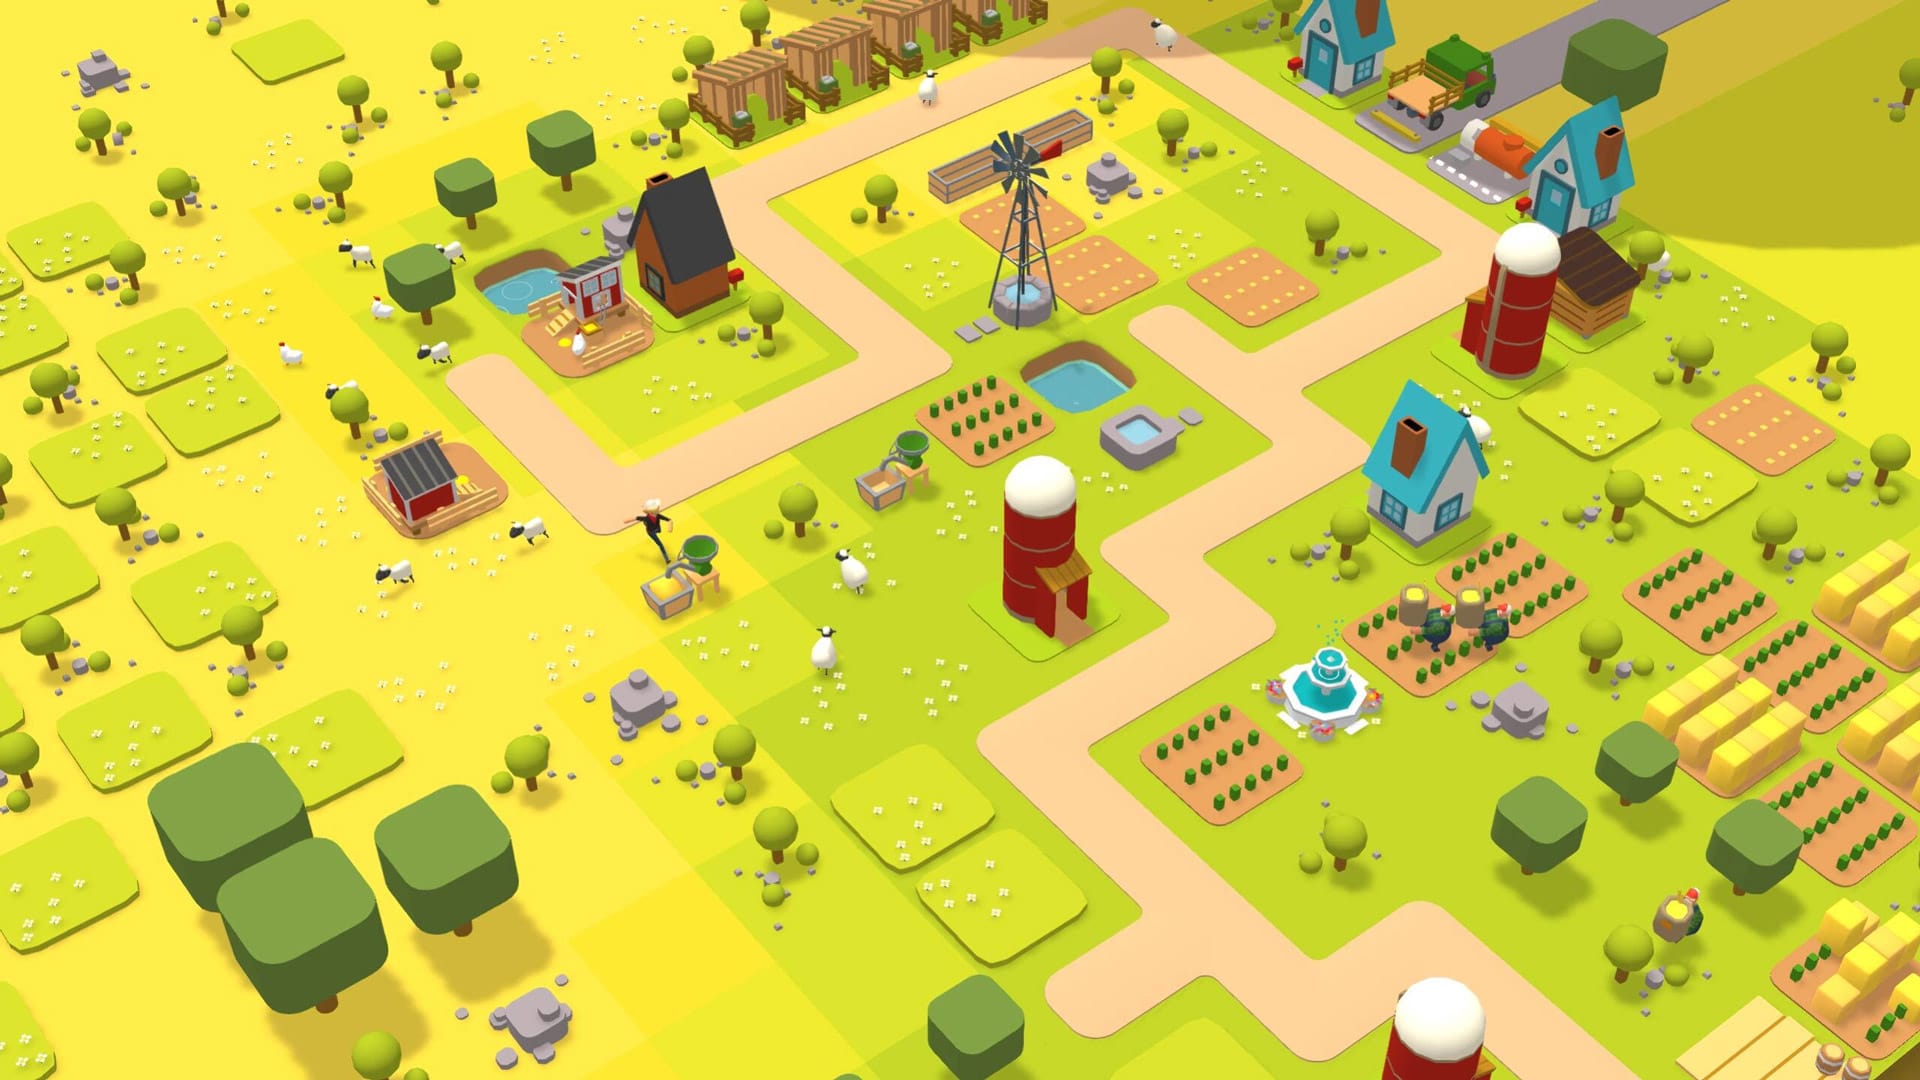 Townstar is the global Play-to-Earn game of town and city builders by Gala Games.